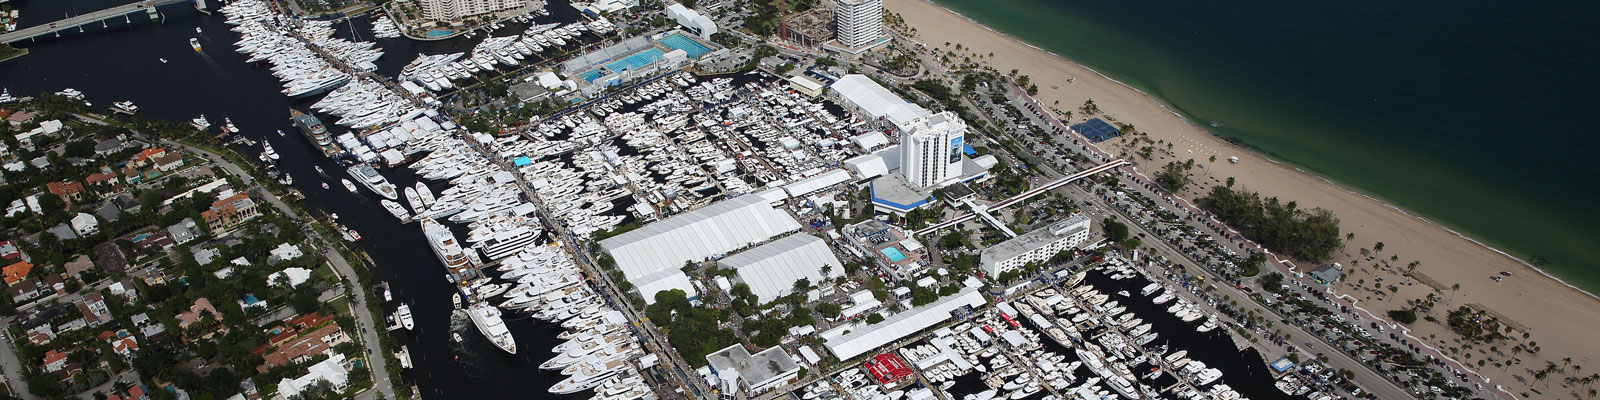 Marinalife’s Guide to the Fort Lauderdale Boat Show